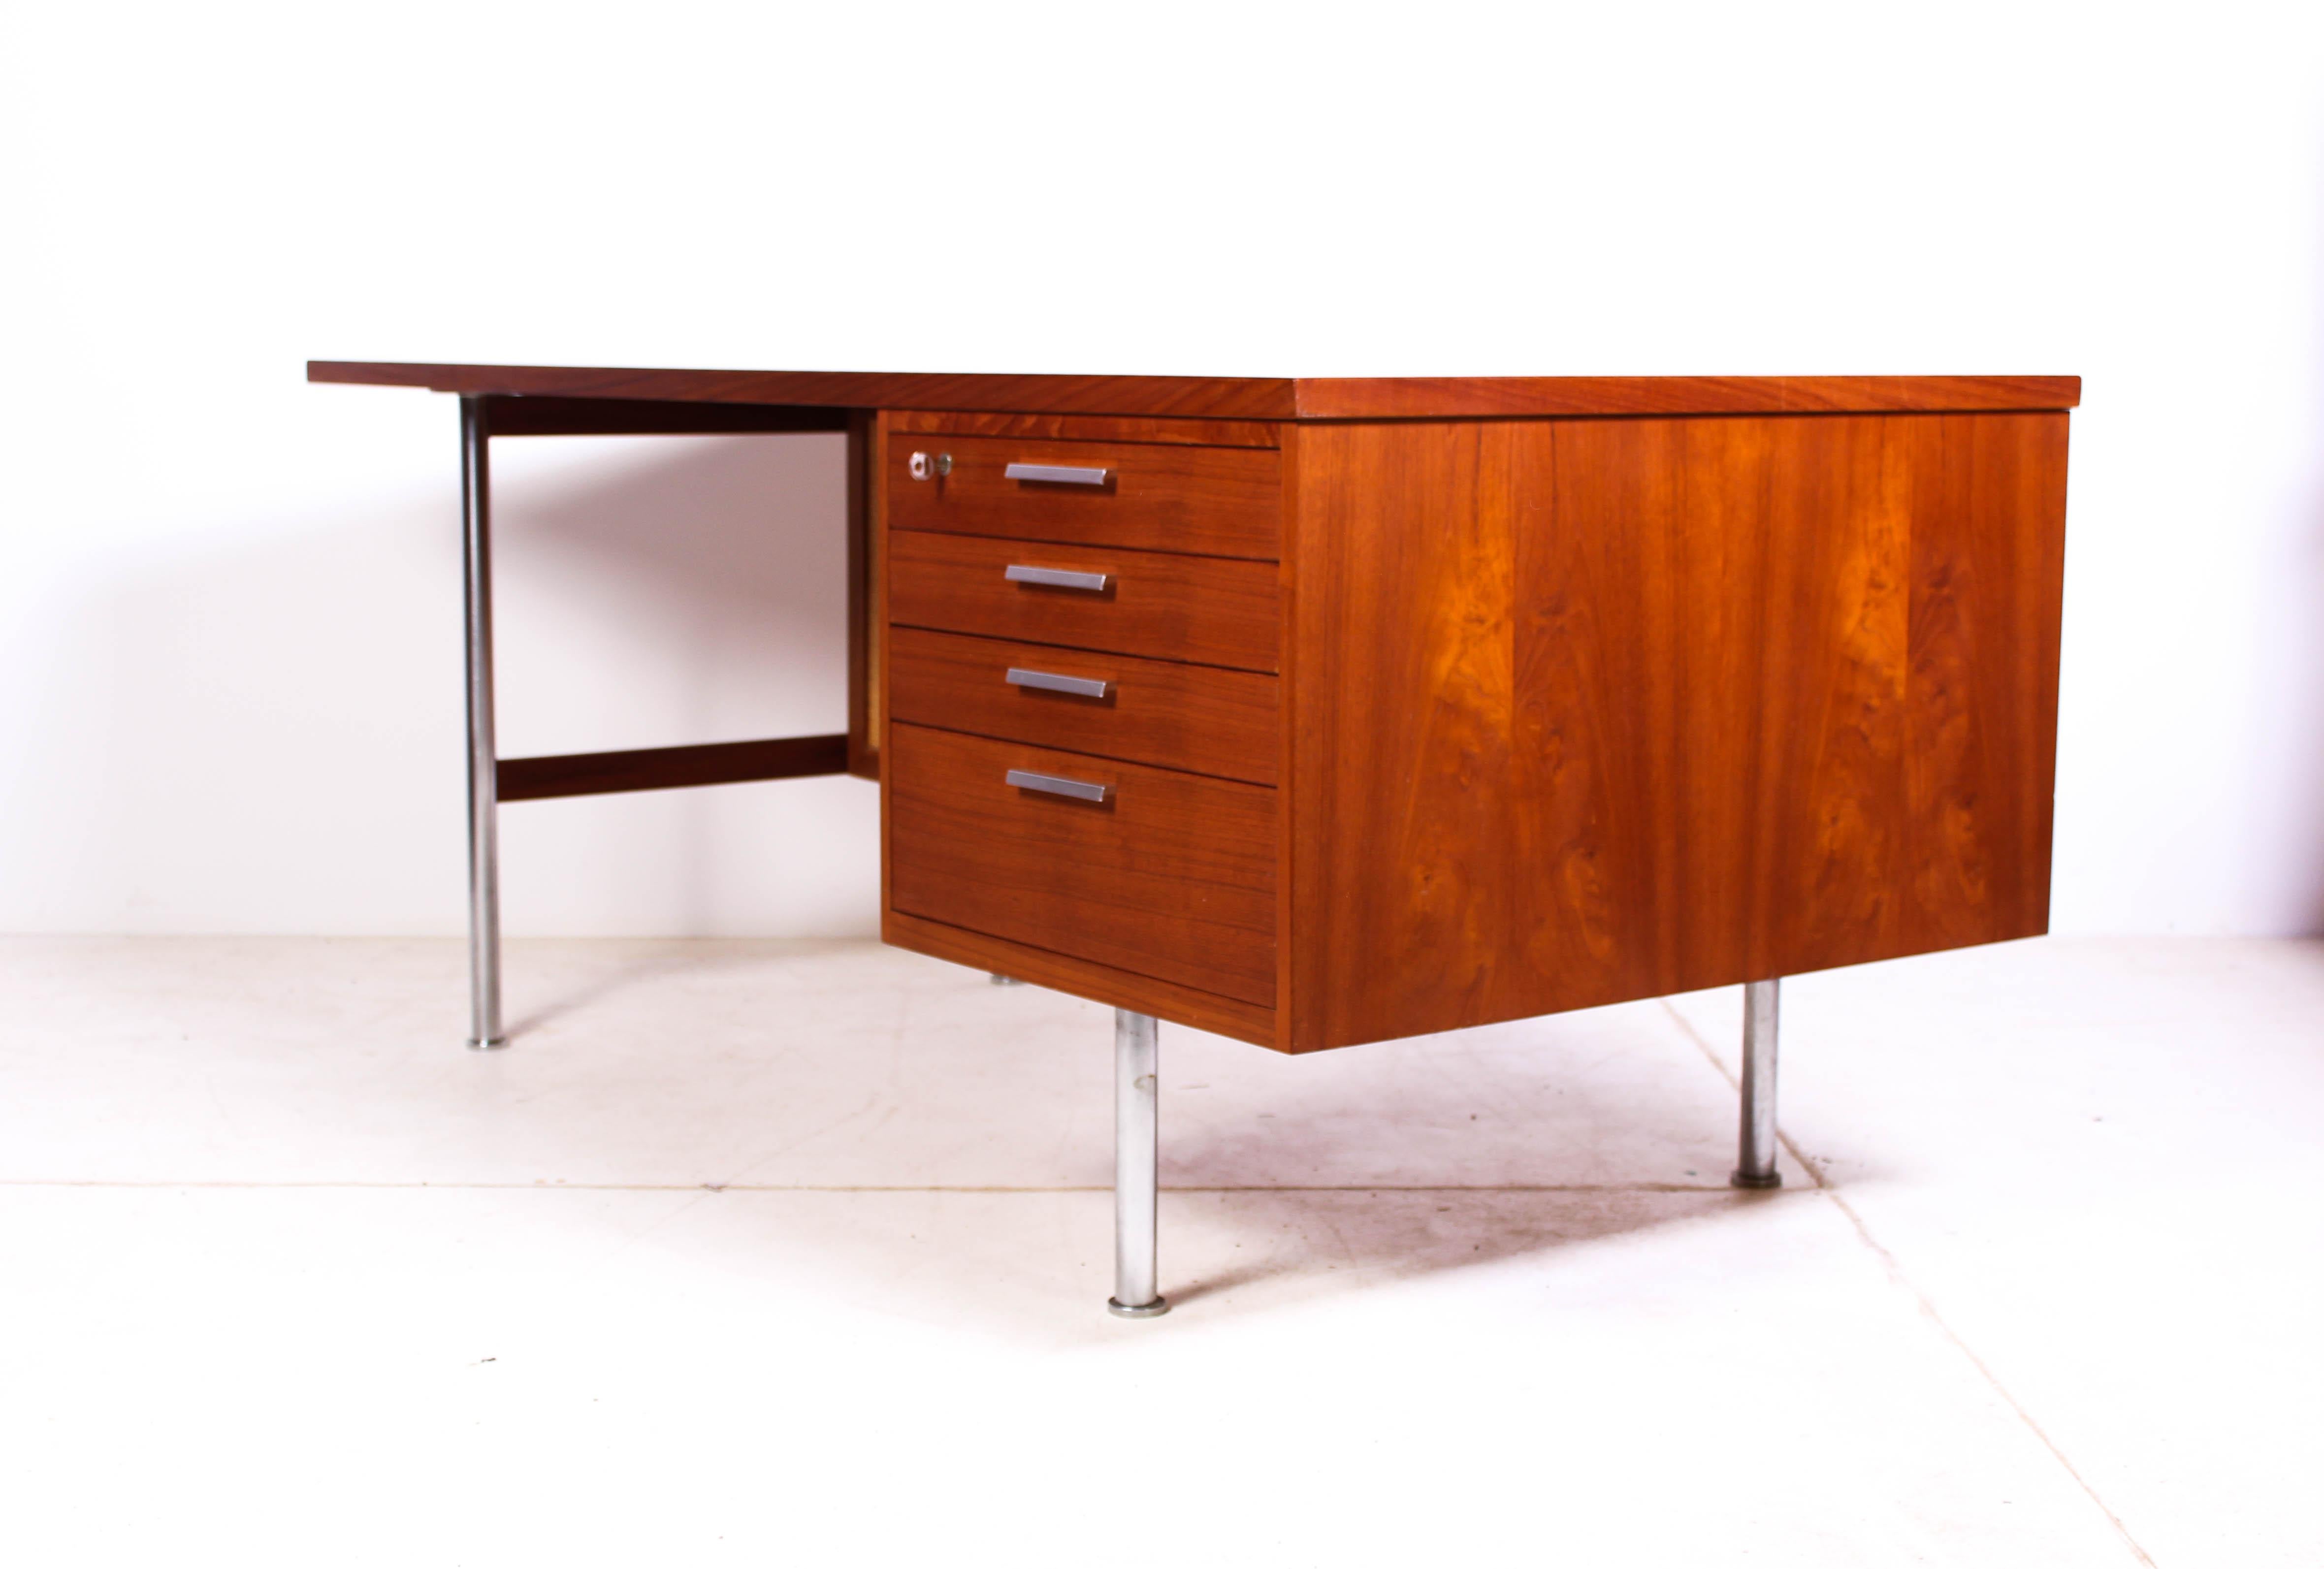 This rare midcentury desk is designed by Danish designer Kai Kristiansen and produced by FM Møbler. The desk is made out of teak with chromed steel legs and cane. It has drawers in the front and a open shelf in the back. This high quality piece is